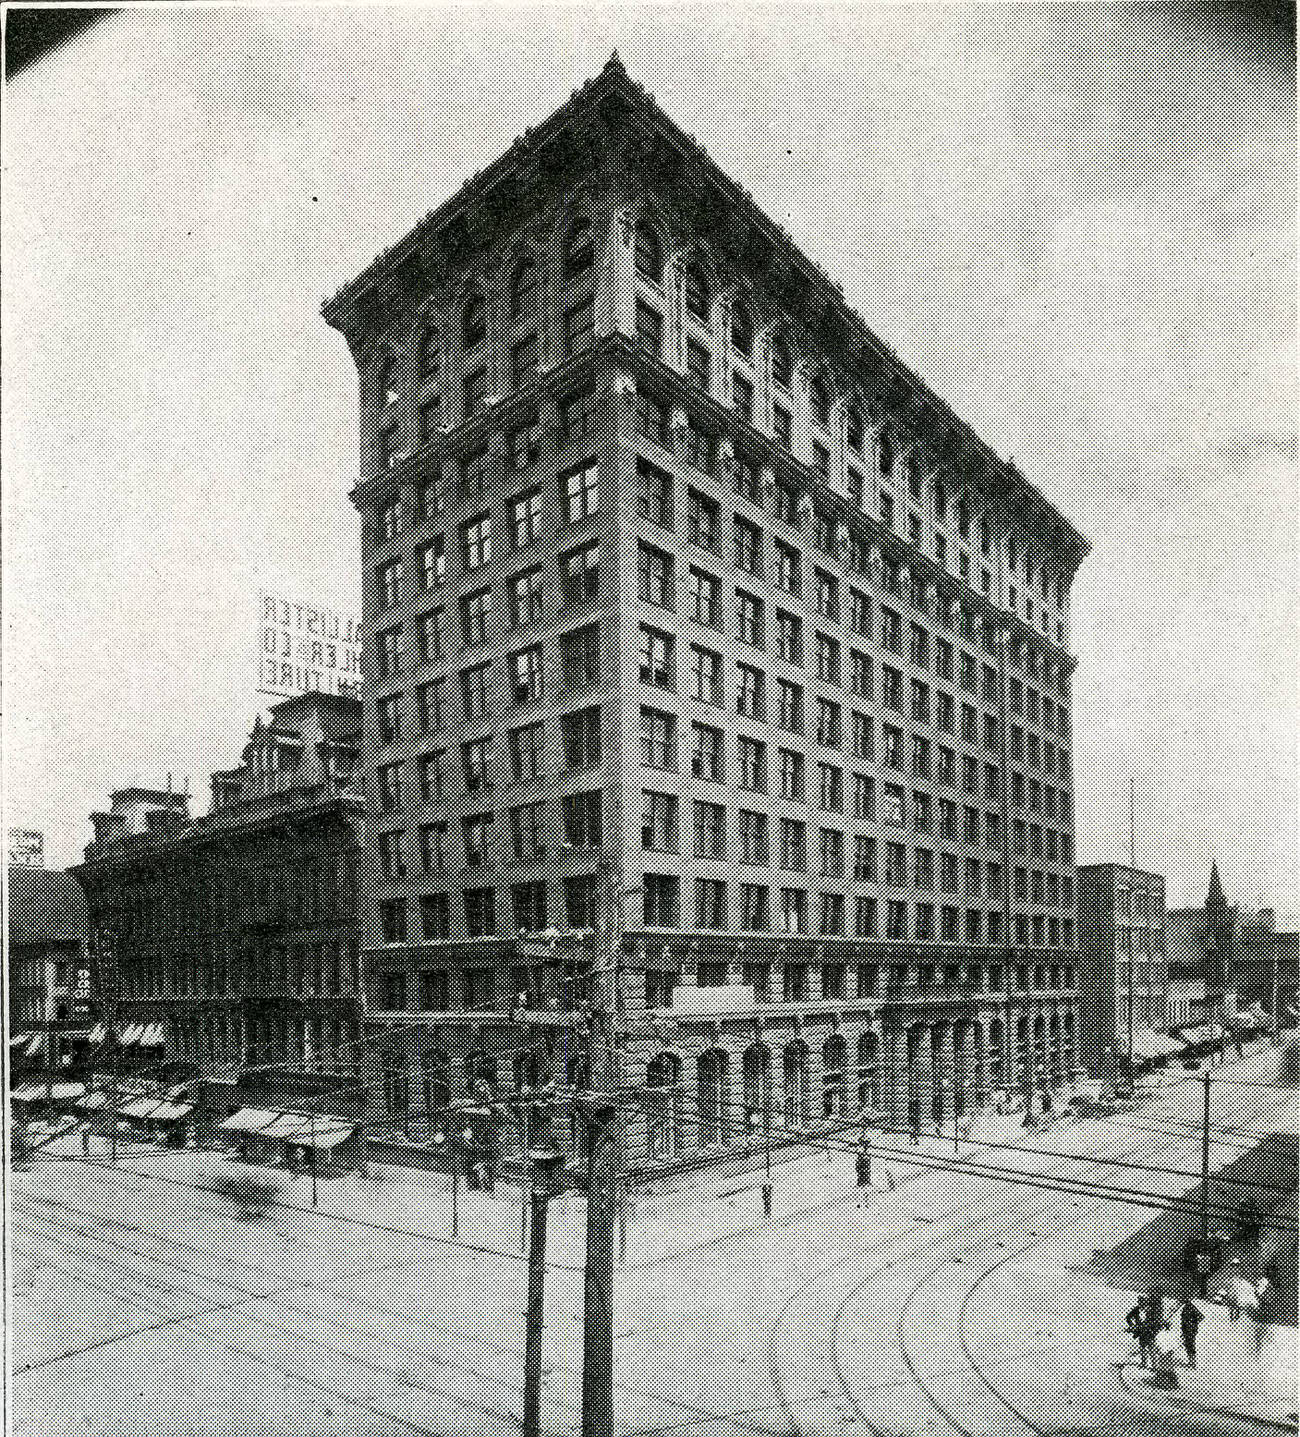 Northeast view of Columbus Savings and Trust Company, also known as Ferris Building, 1909